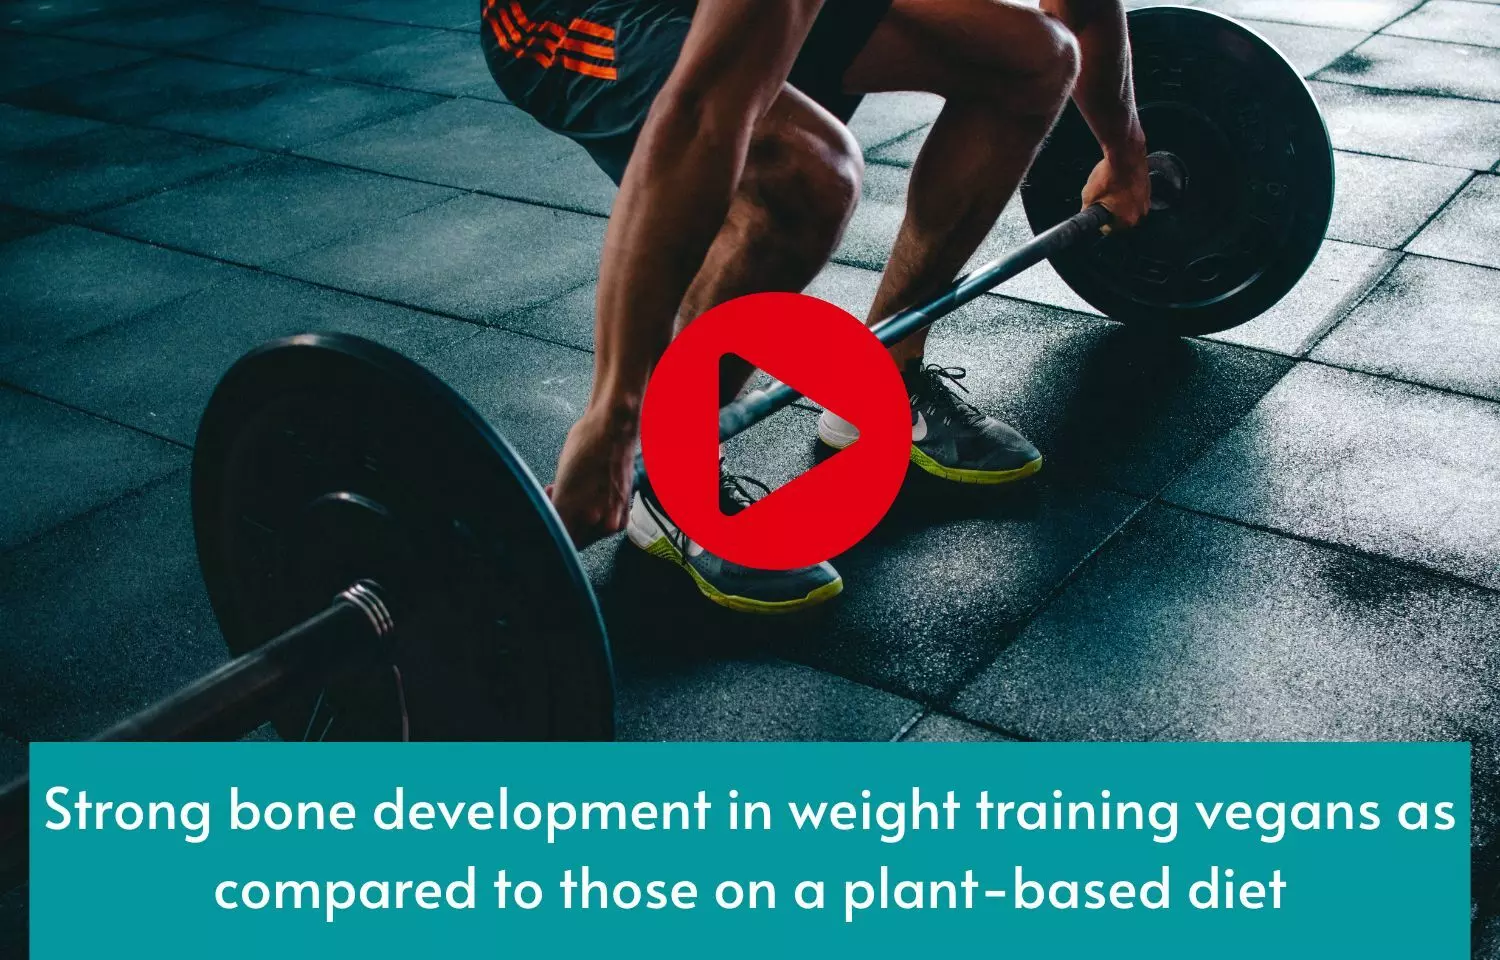 Strong bone development in weight training vegans as compared to those on a plant-based diet